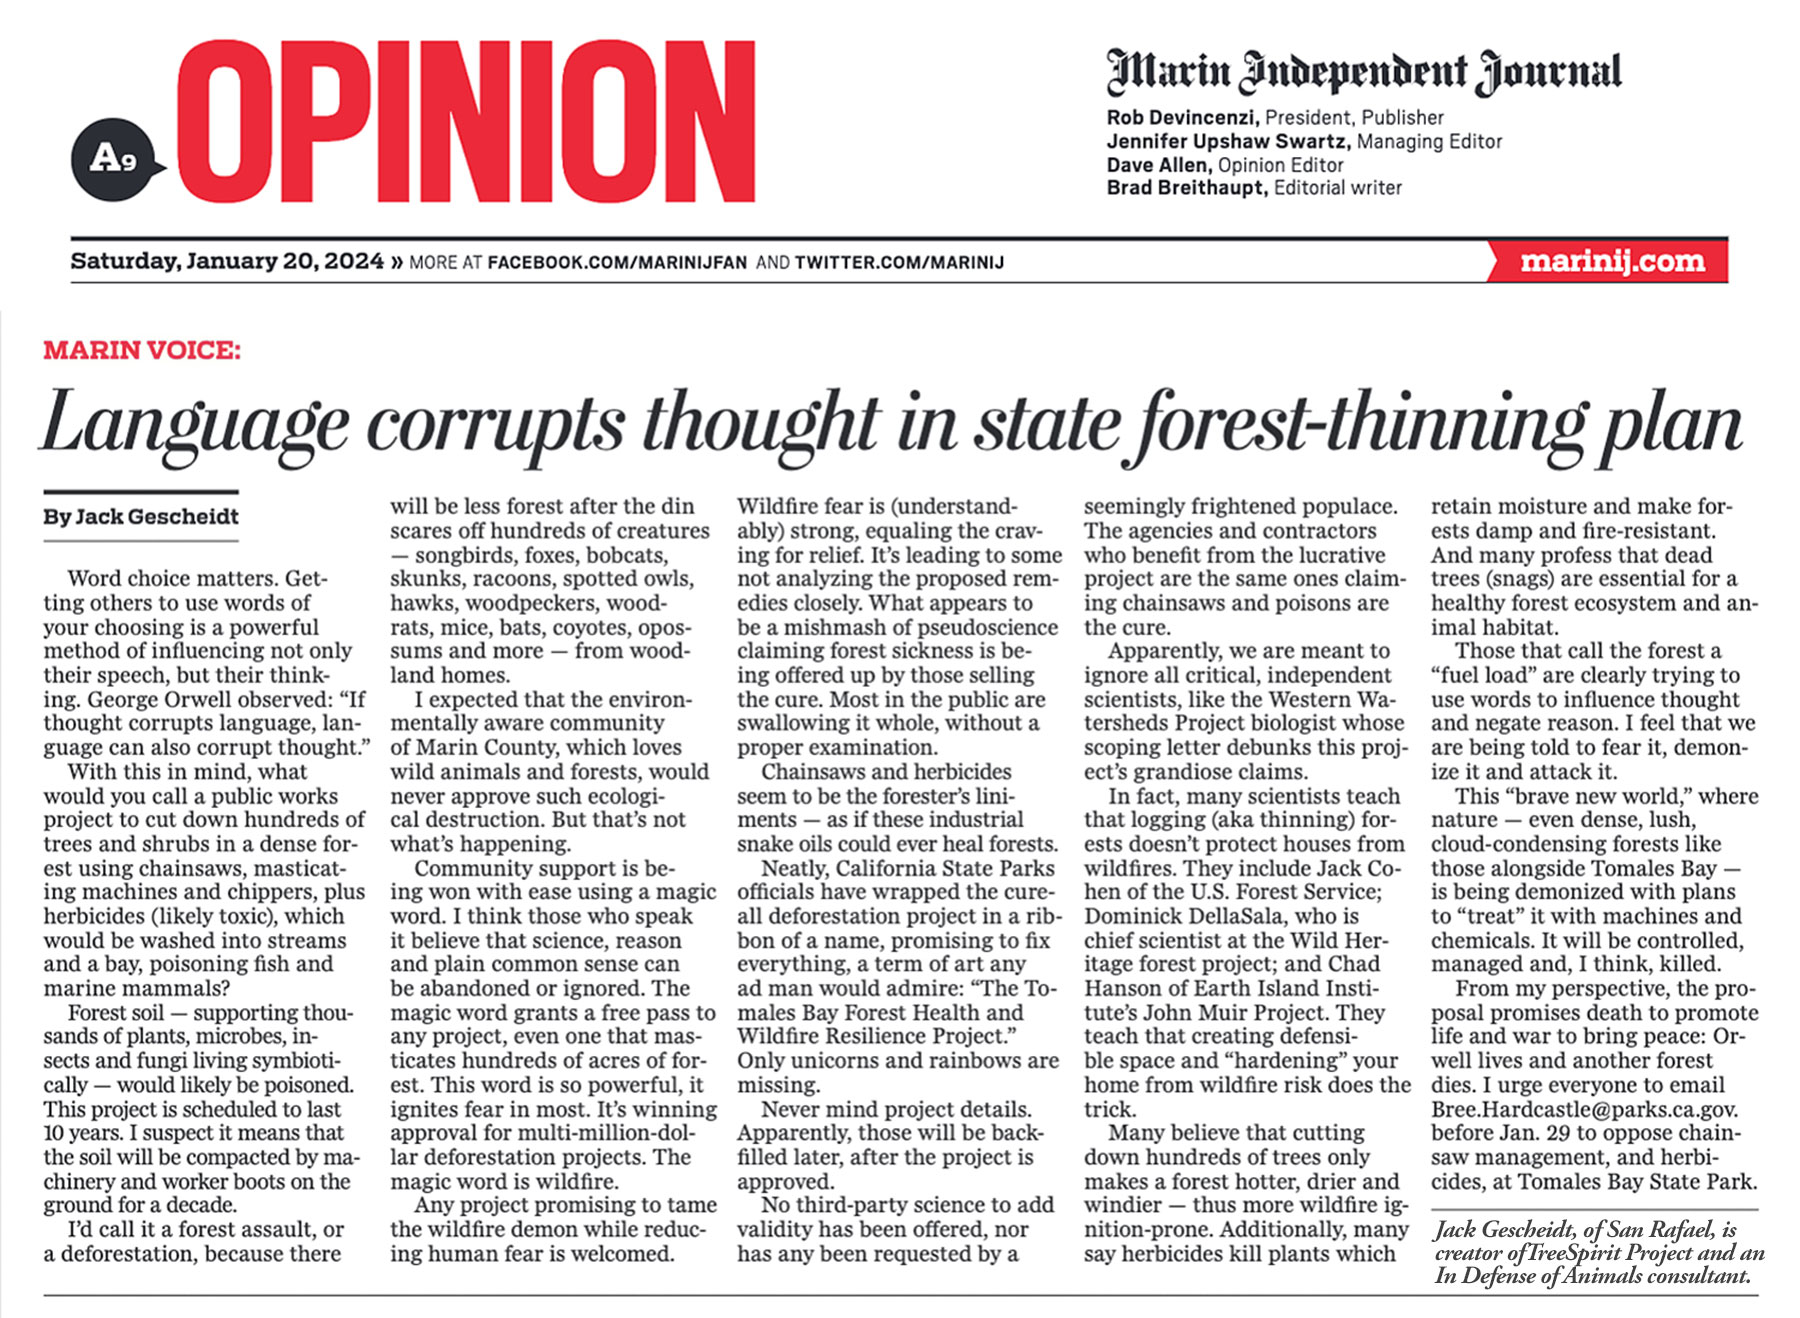 OPINION-Orwell's-Forest-Language-corrupts-thought-Orwell's-Forest-Tomales-Bay-SP-Jack-Gescheidt-Marin-Independent-Journal-Voice-1.20.24.jpg